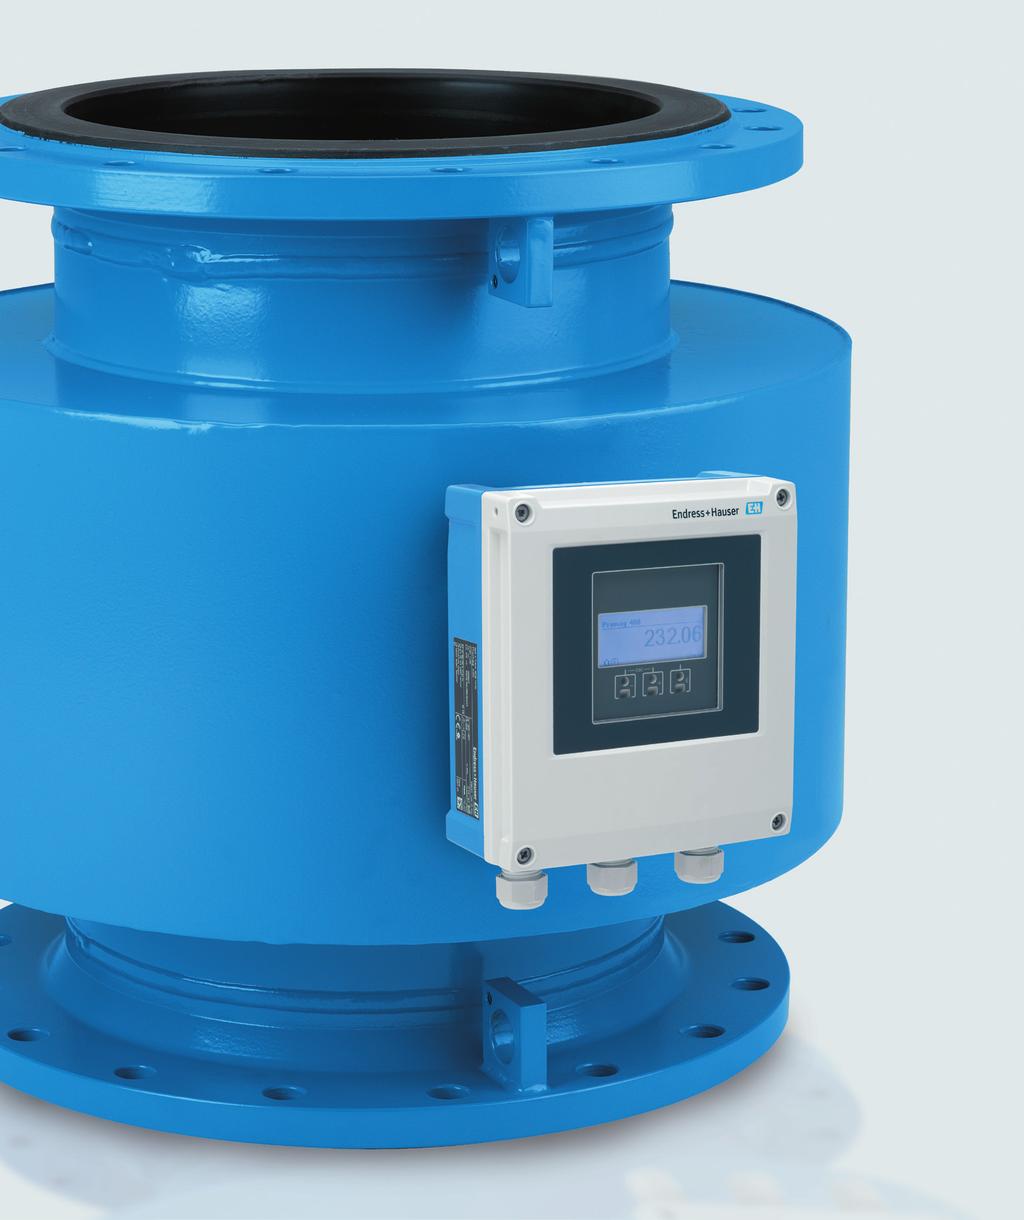 Products Solutions Services Proline Promag 400 For flow measurement of water and wastewater Flow Measurement Time and cost-saving measuring technology Industry-optimized flowmeters with